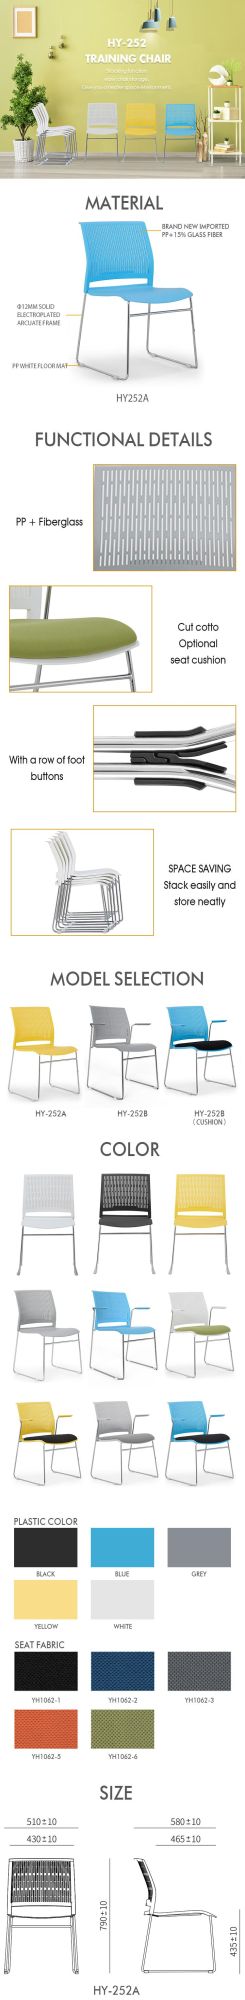 Good Quality Student Study Training Chair Garden Metal Chair Outdoor